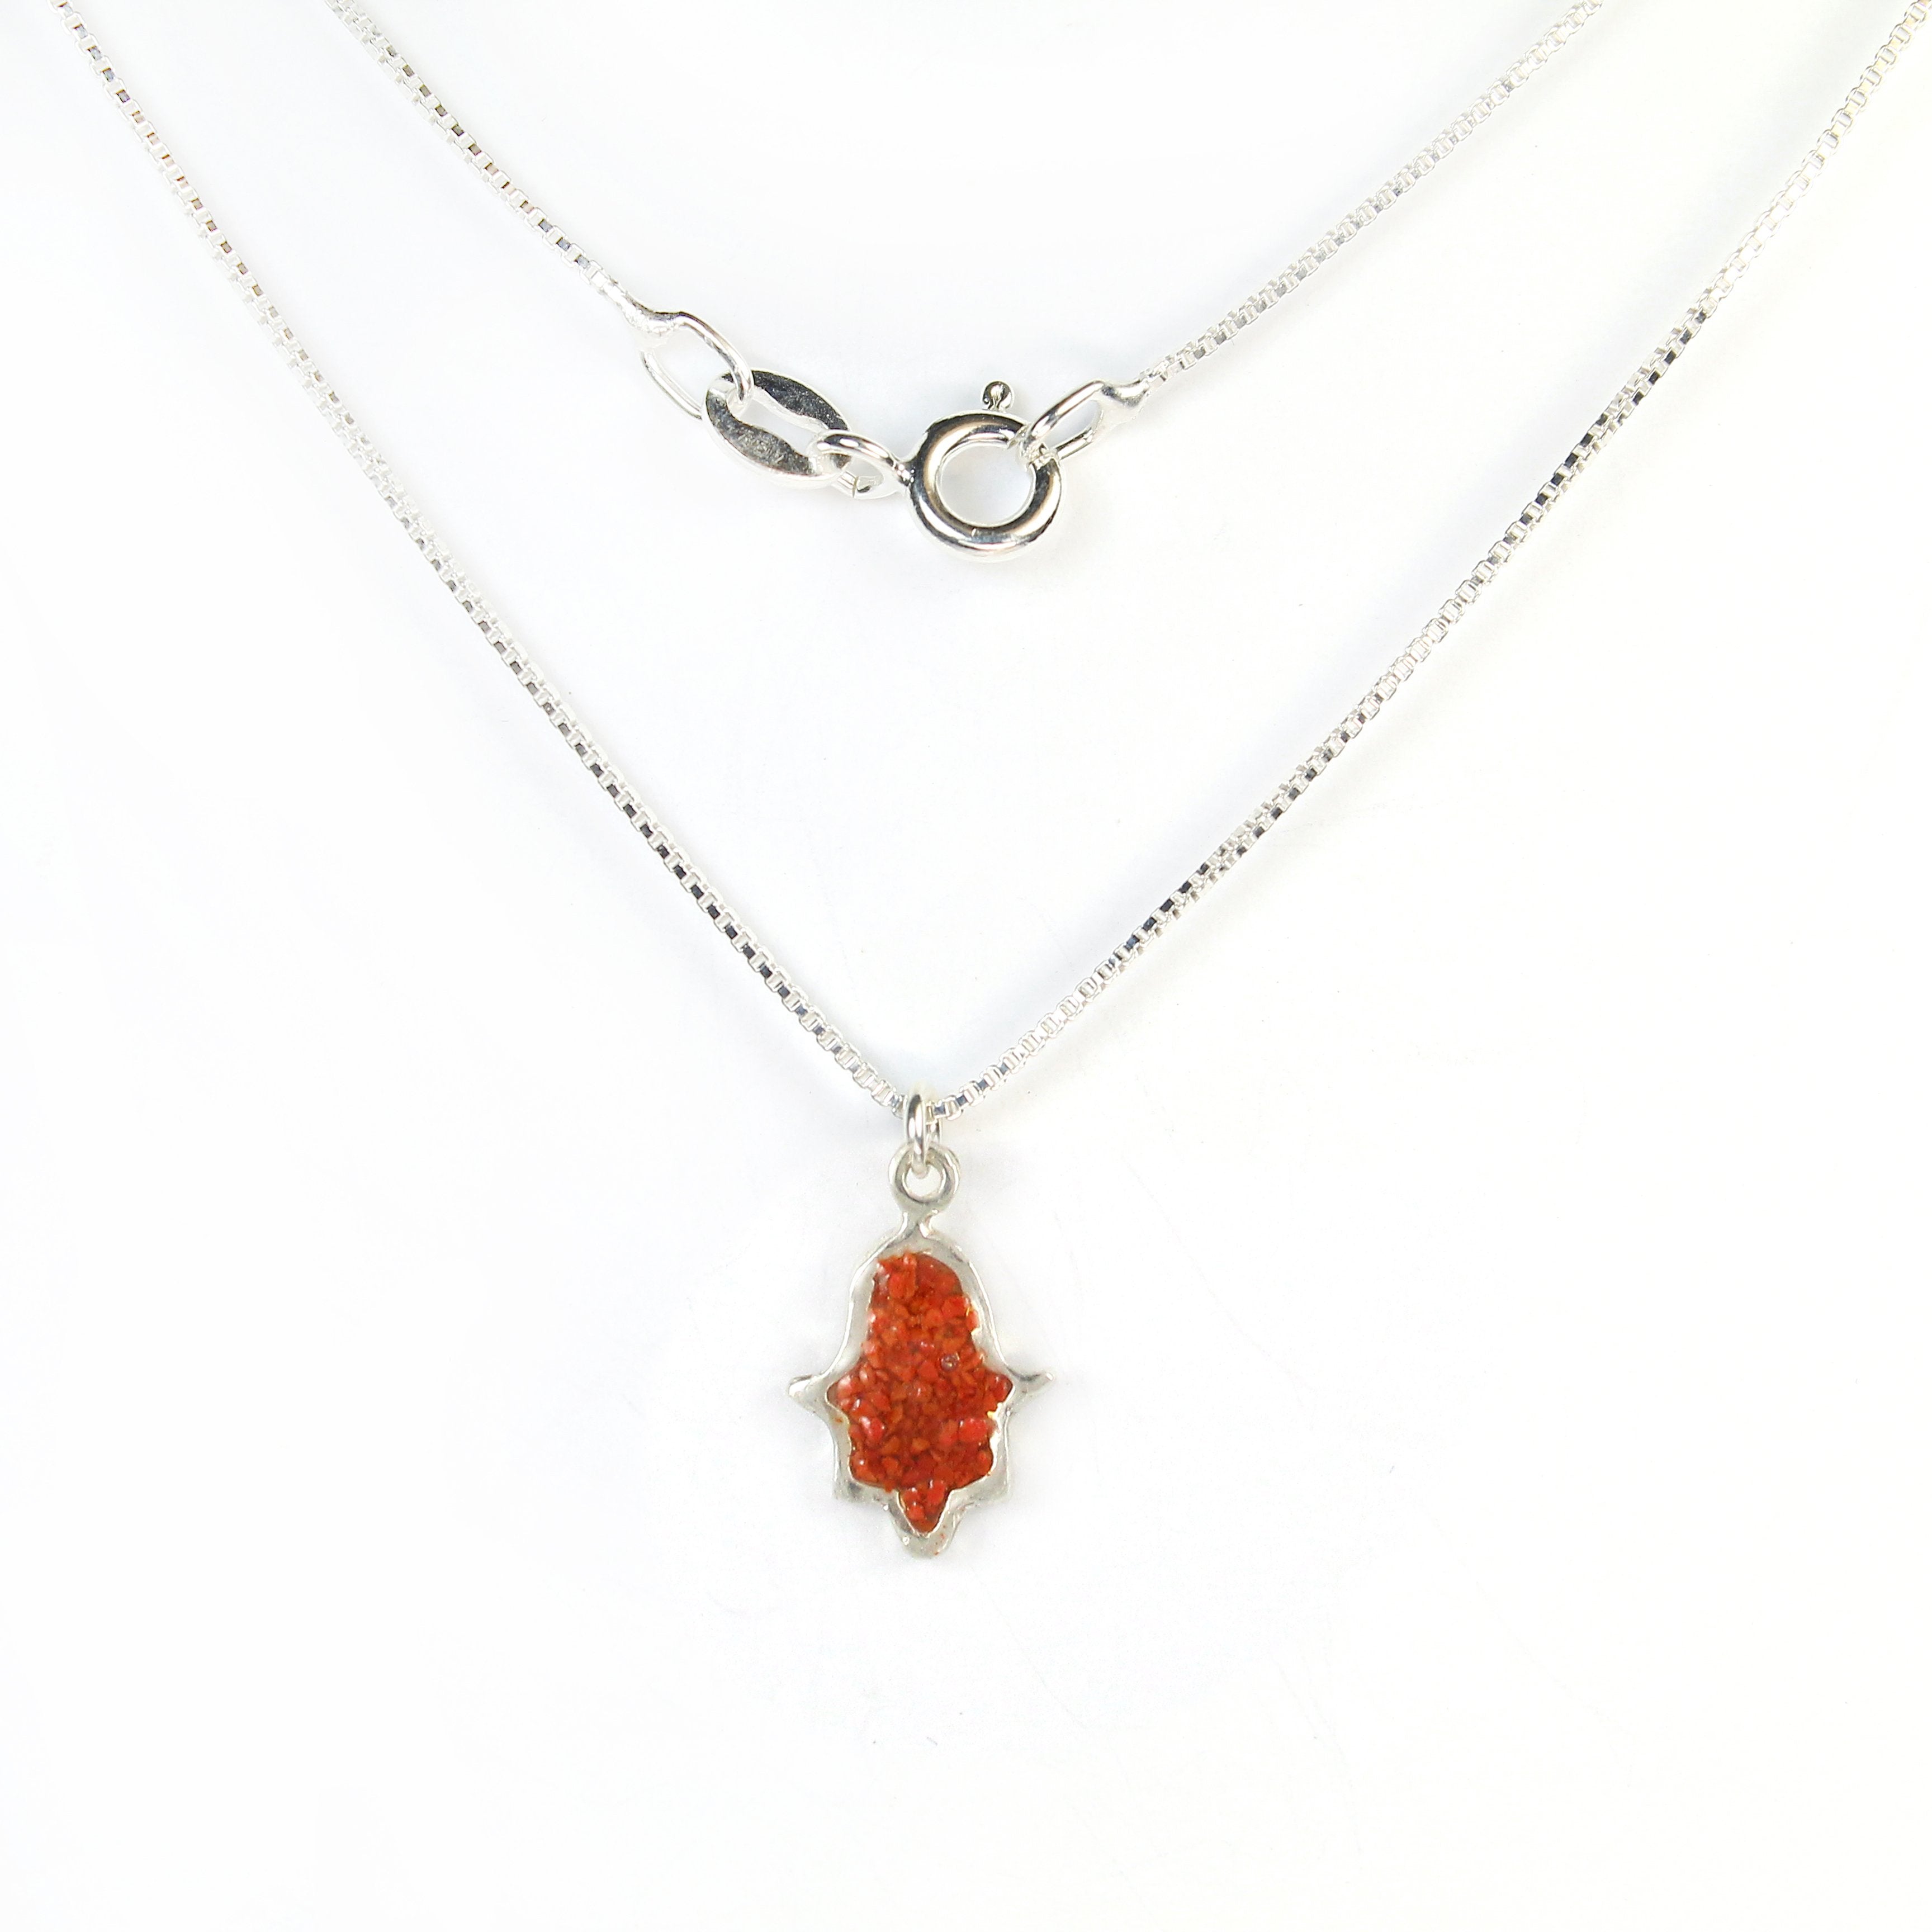 Small Red Hamsa Necklace with stones - Shulamit Kanter